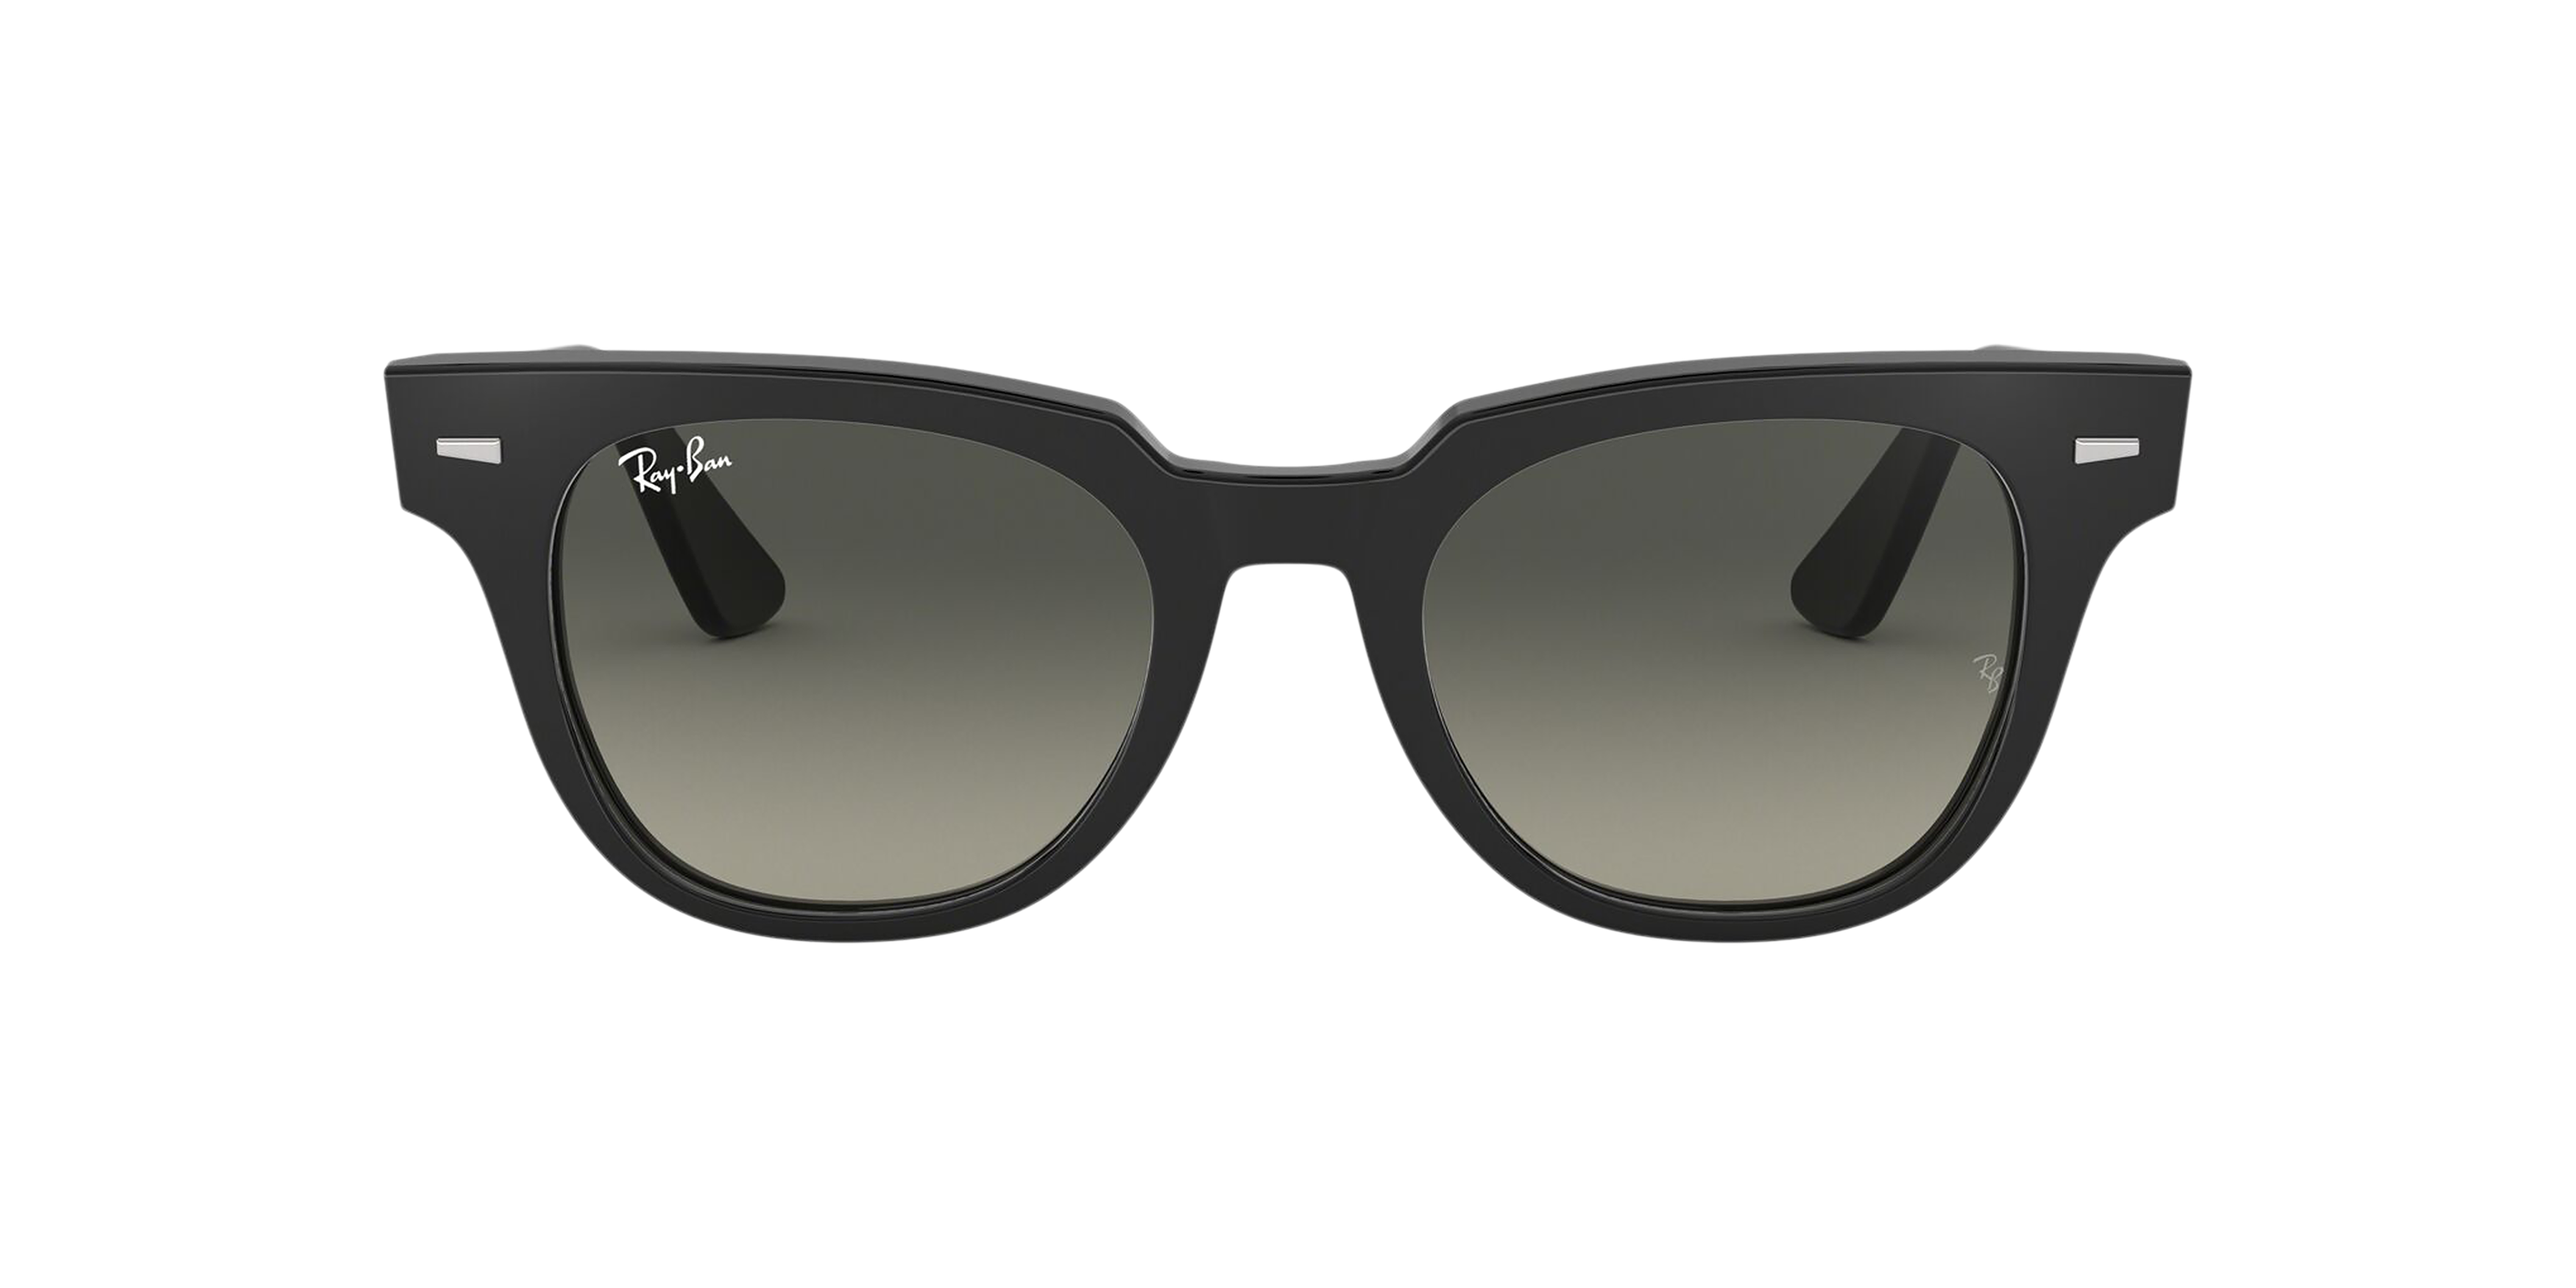 [products.image.front] Ray-Ban Meteor Classic RB2168 901/71